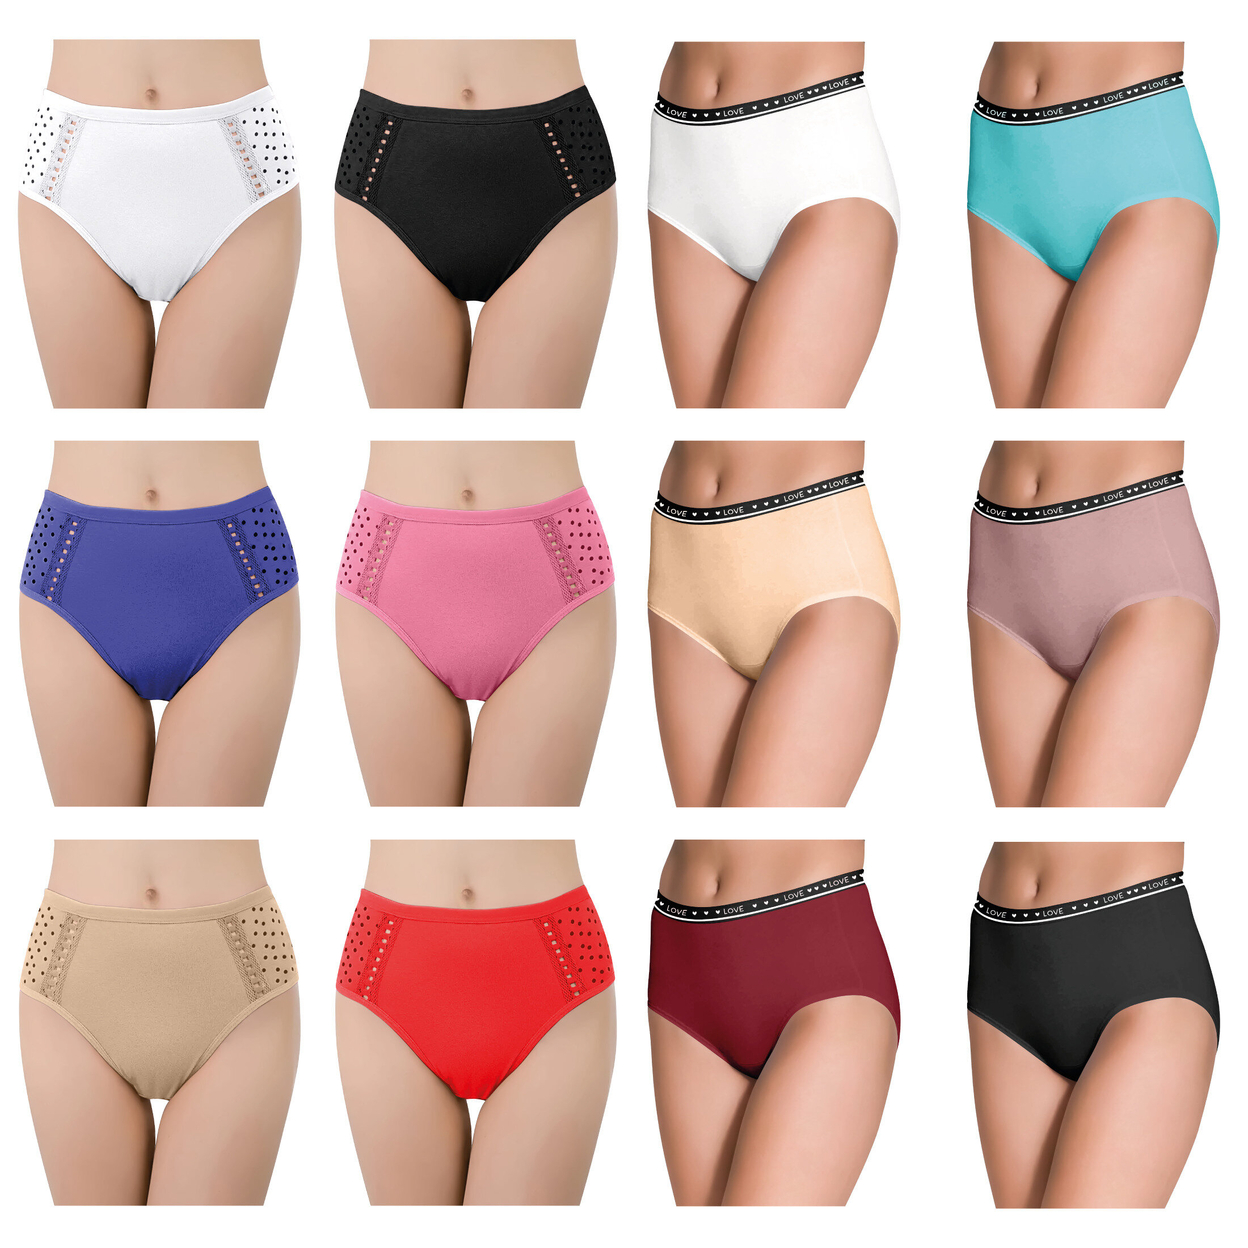 6-Pack: Women's Ultra Soft Moisture Wicking Panties Cotton Perfect Fit Underwear (Plus Sizes Available) - Medium